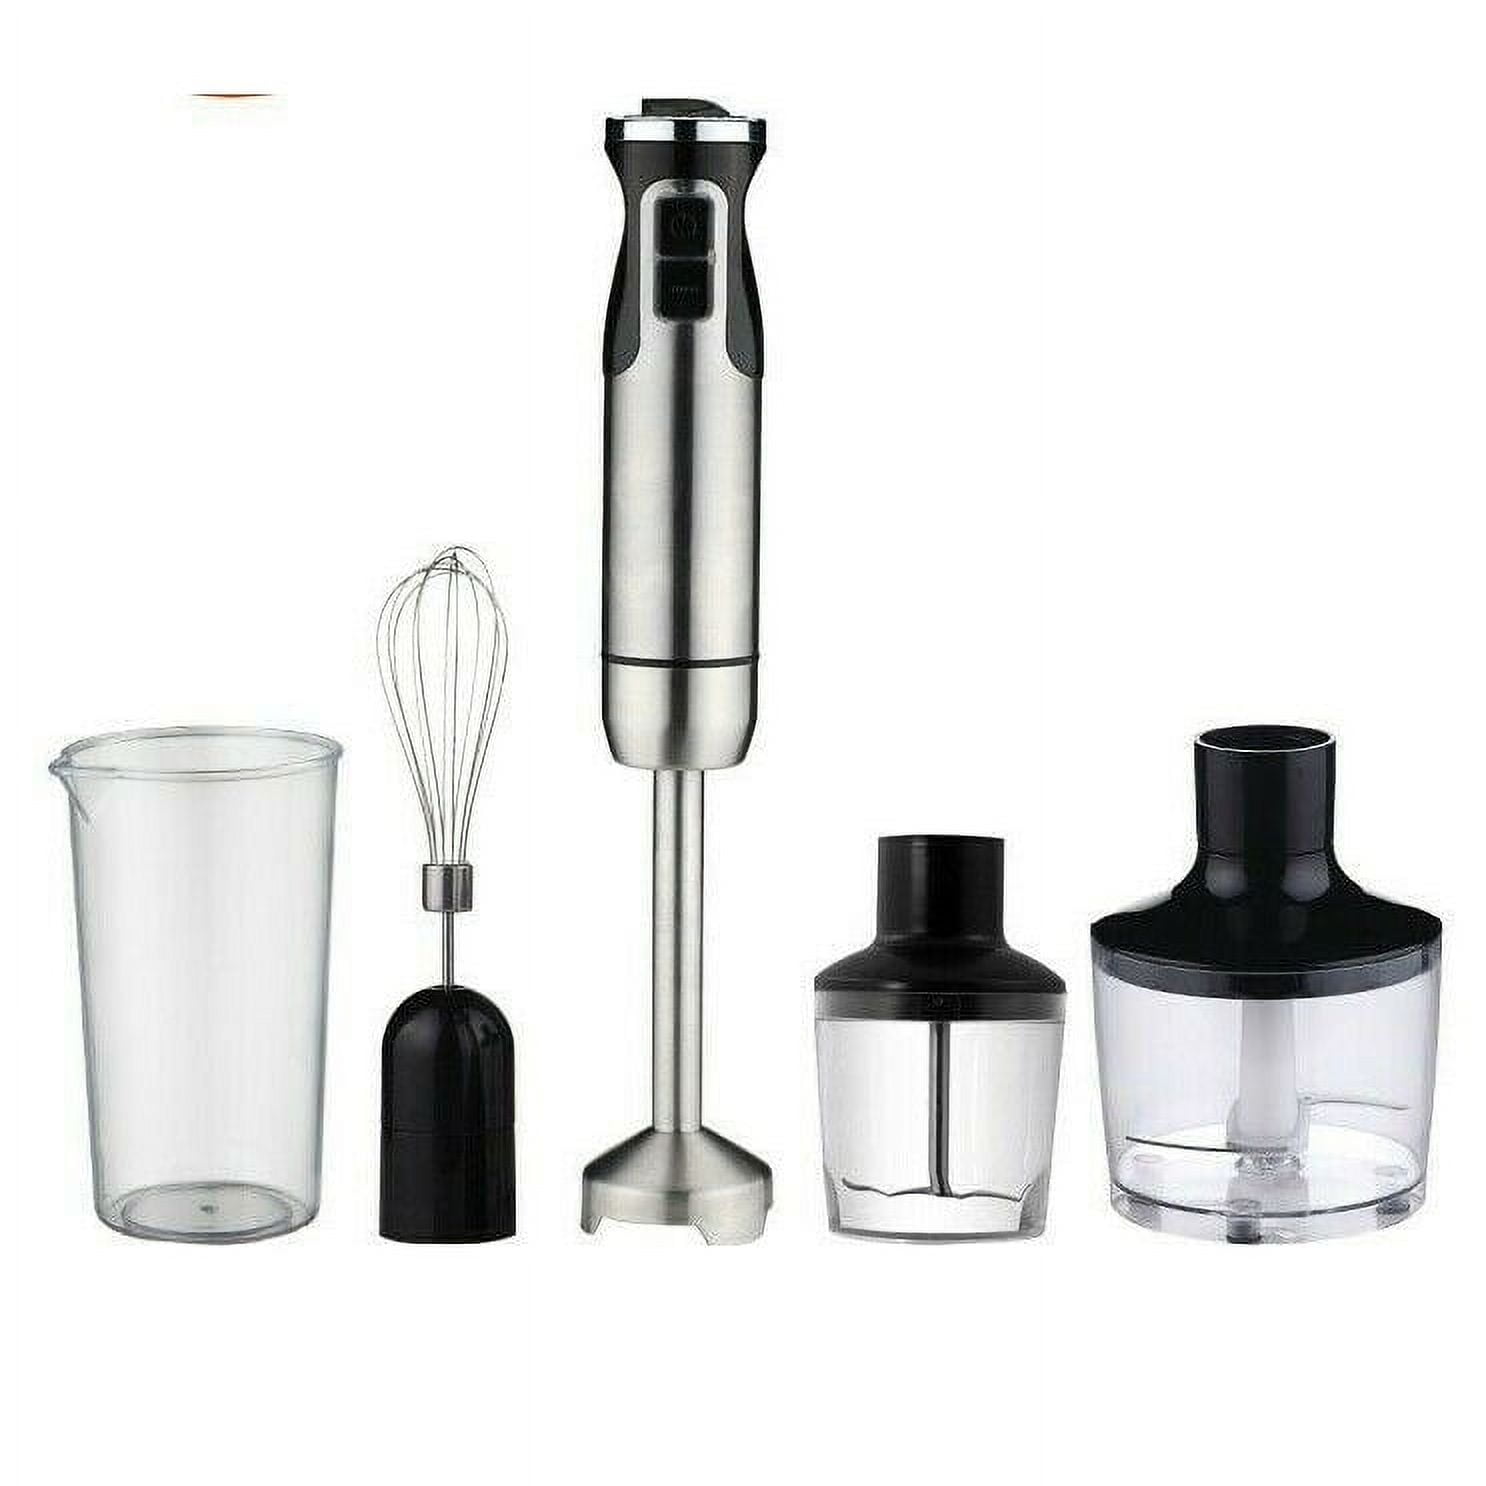 Dropship Hand Blender 500W 3-in-1 Multifunctional Electric Immersion Blender  8 Variable Speed Stick Batidora Emersion Mixer; 600ml Mixing Beaker; Whisk  Attachment; BPA Free 5 Core to Sell Online at a Lower Price